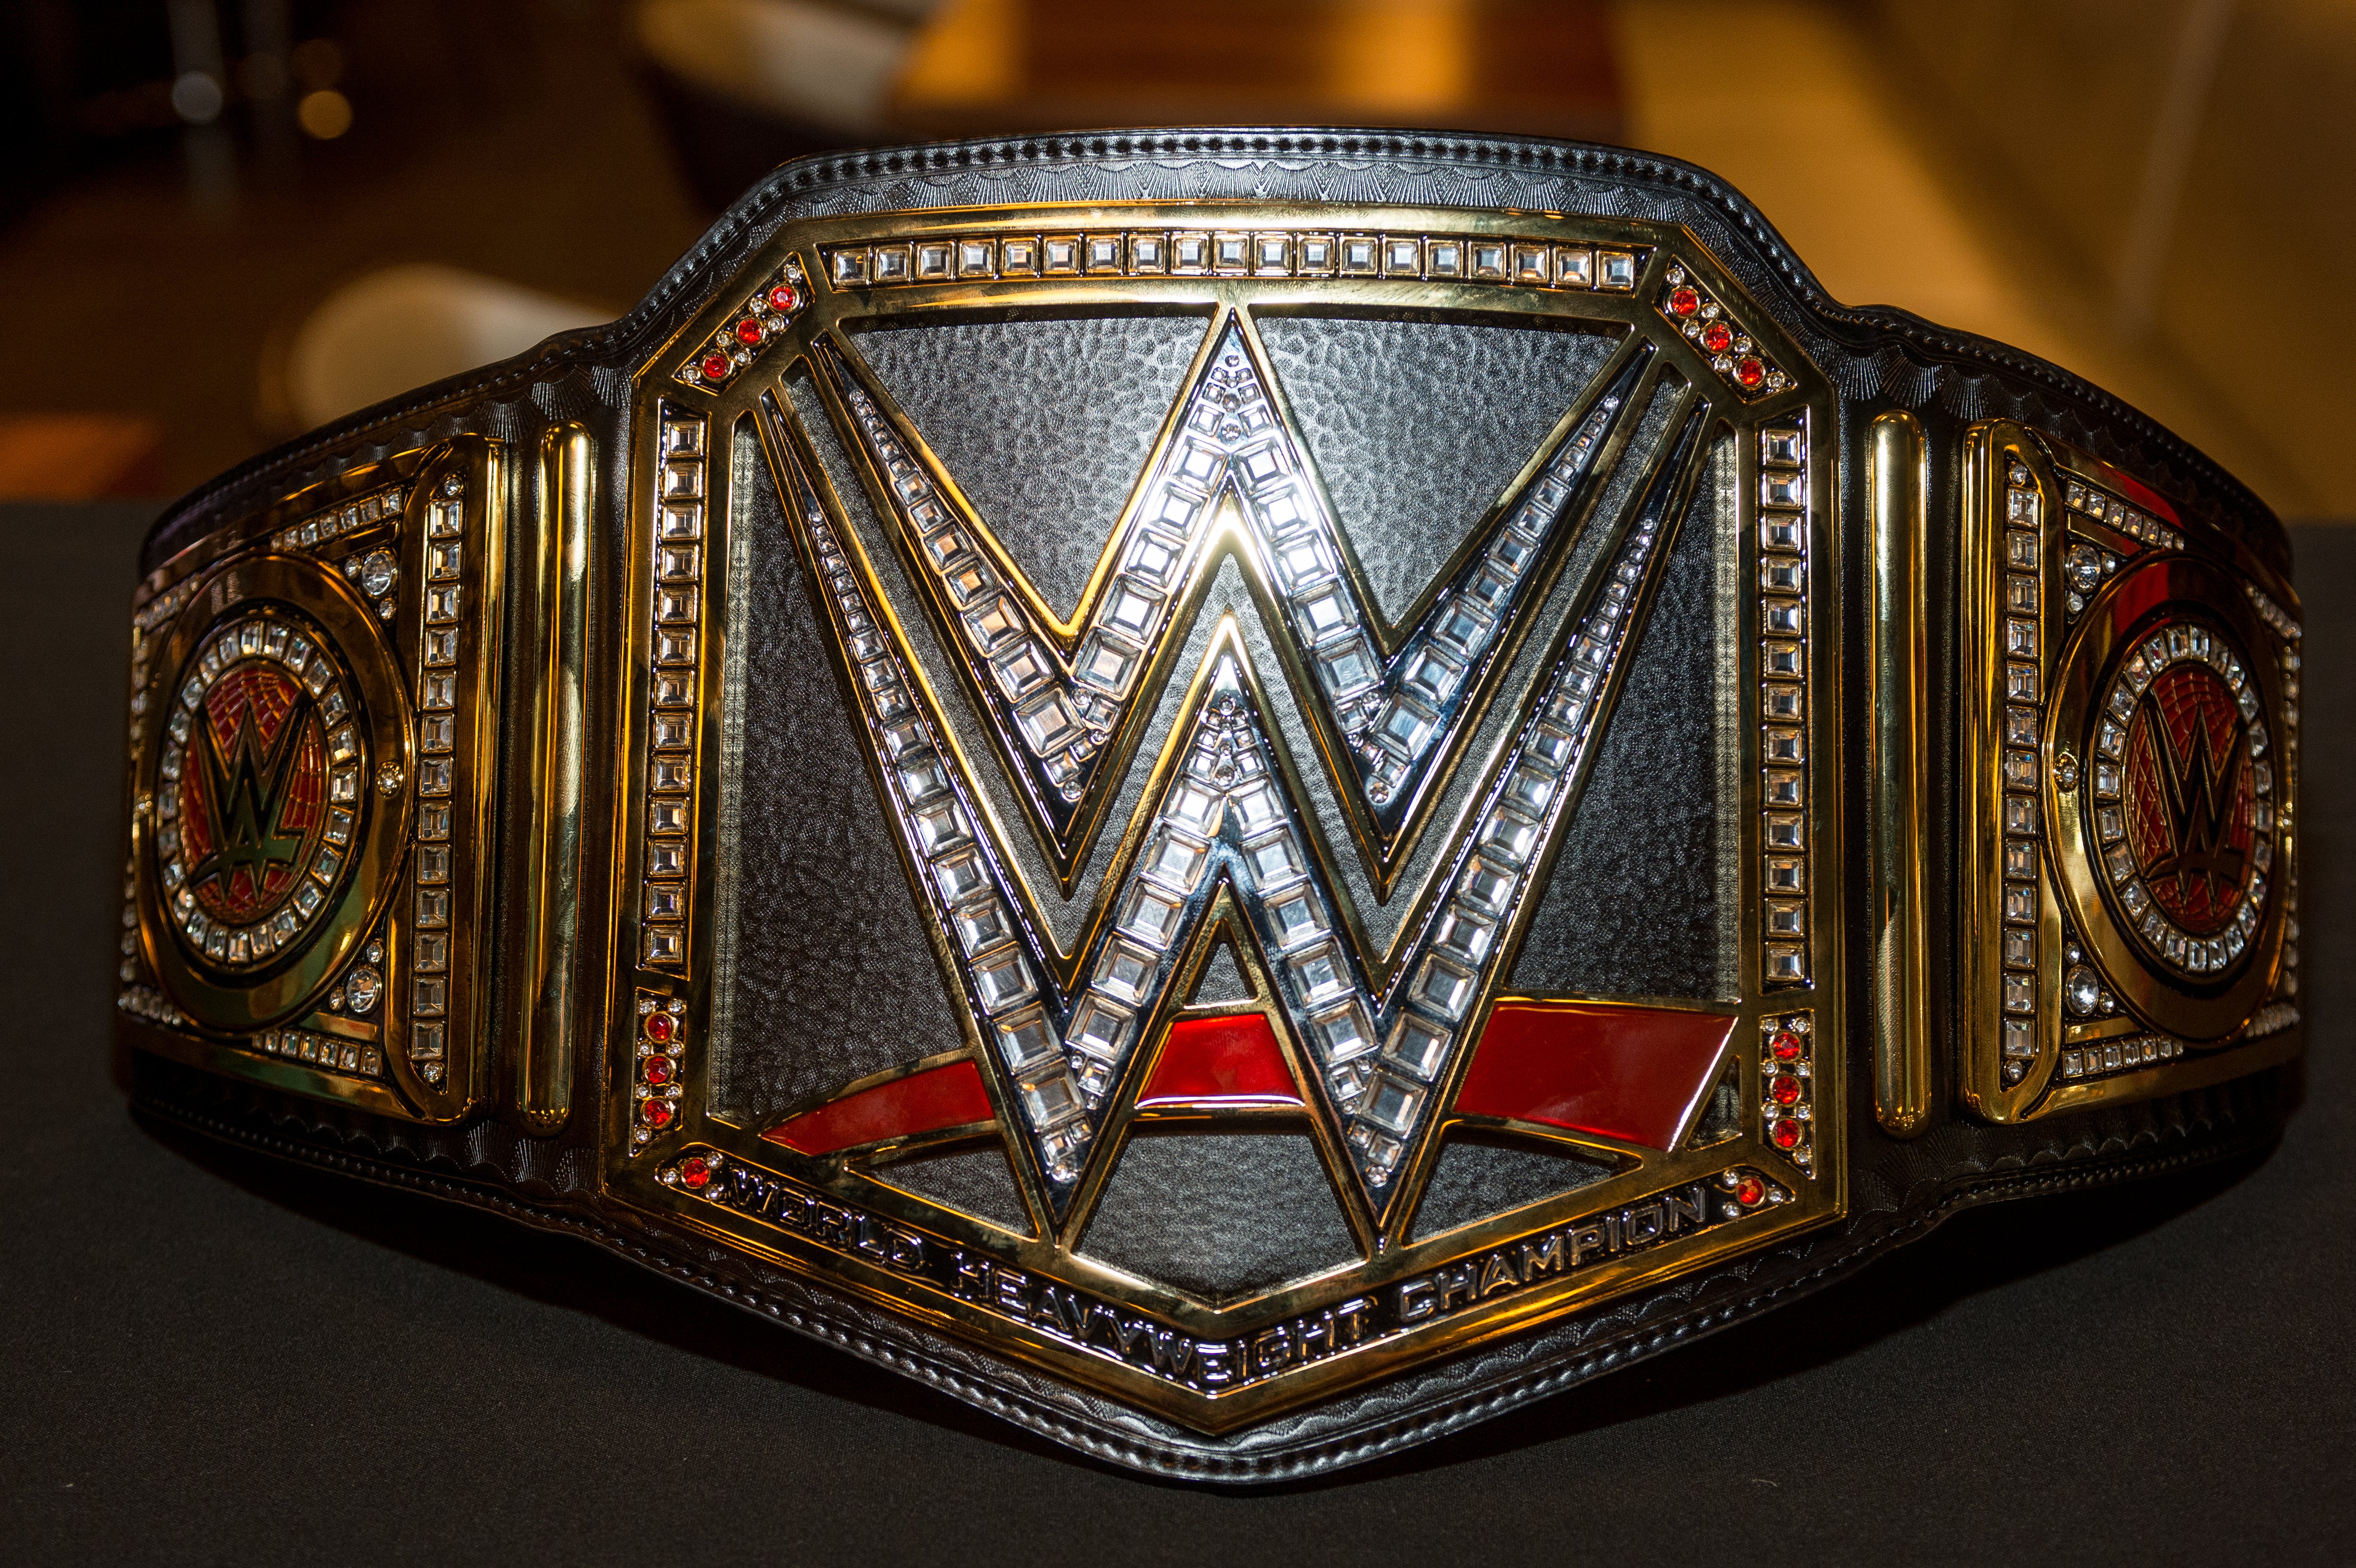 WWE Championship Belt presented during the Beyond Sport United 2016 at Barclays Center on August 9, 2016 in Brooklyn, New York.